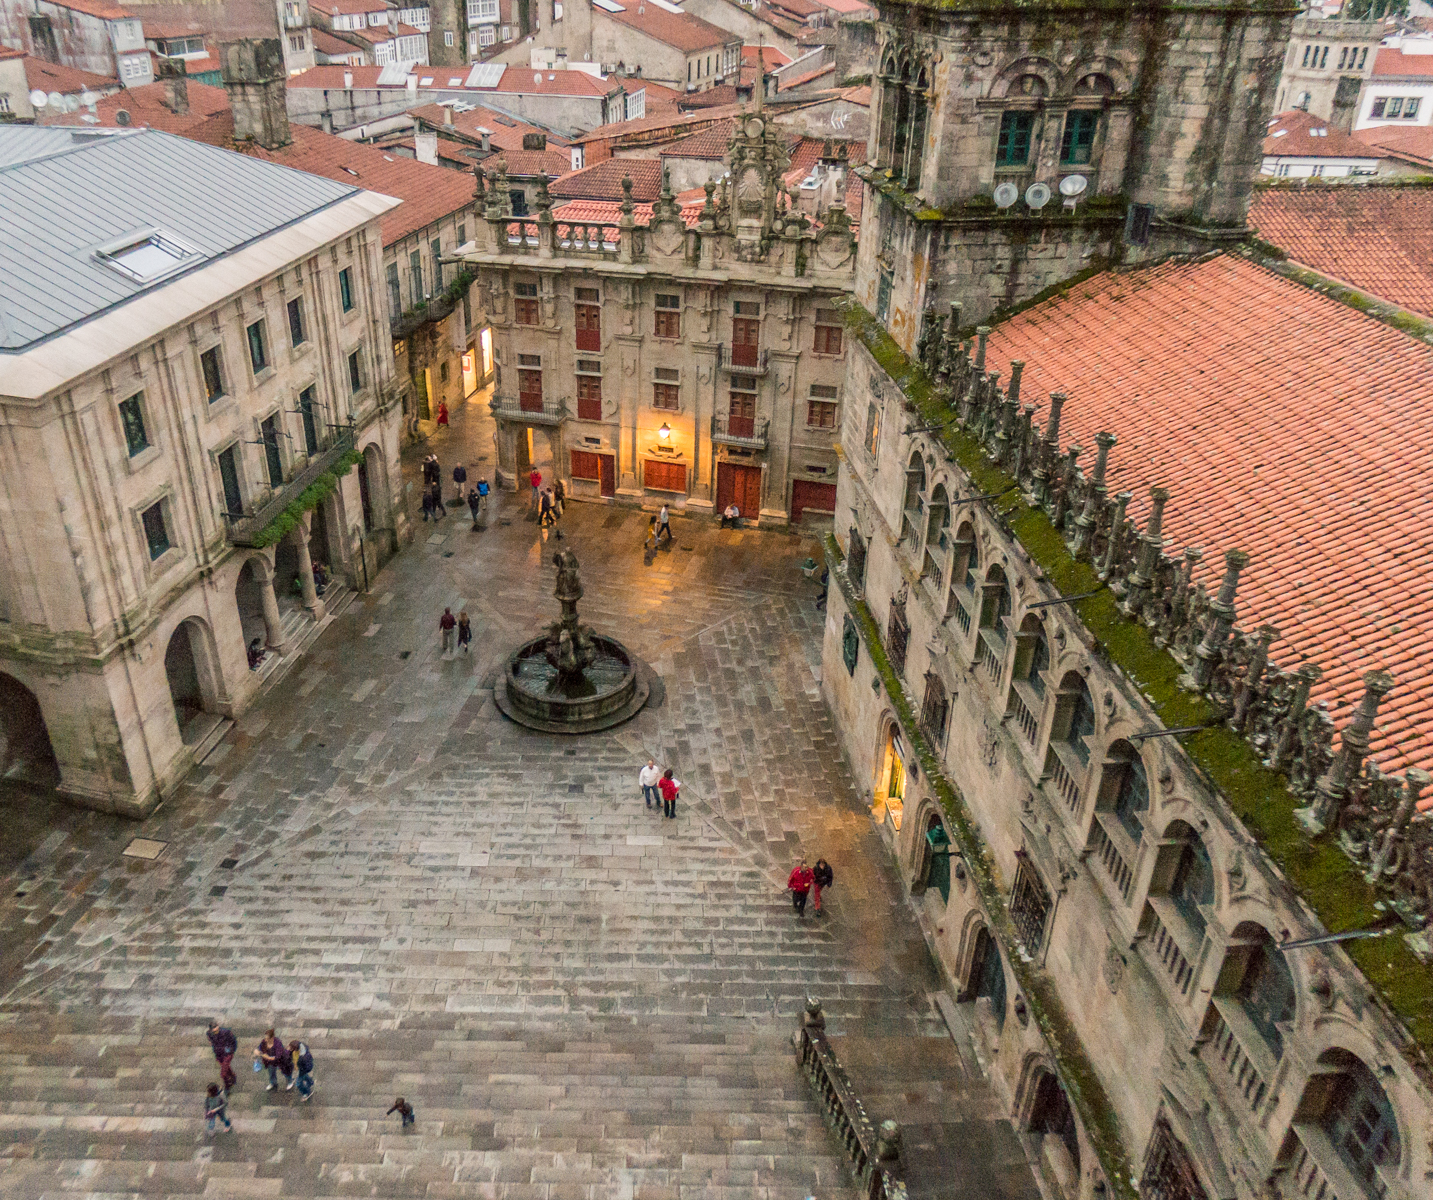 Plaza de las Plateras viewed from roof of south transept of Catedral de Santiago (Spain) | Photo by Mike Hudak